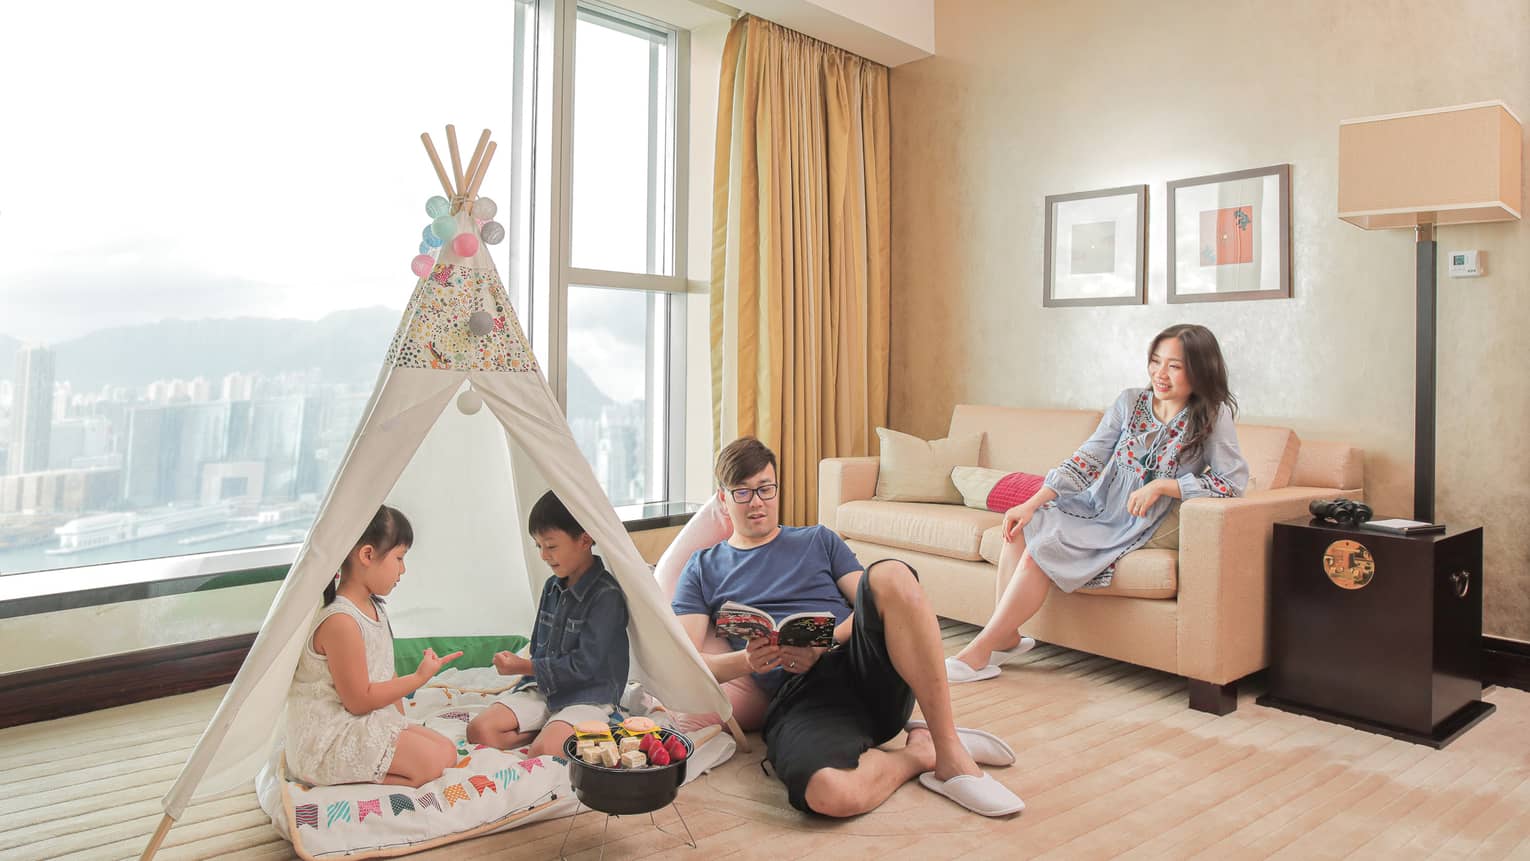 In a brightly lit beige-coloured suite with floor-to-ceiling windows, mom sits on the sofa and looks on as dad reads a book on the floor next to two children playing rock, paper, scissors in a glamping adventure tent set-up with small barbecue in front